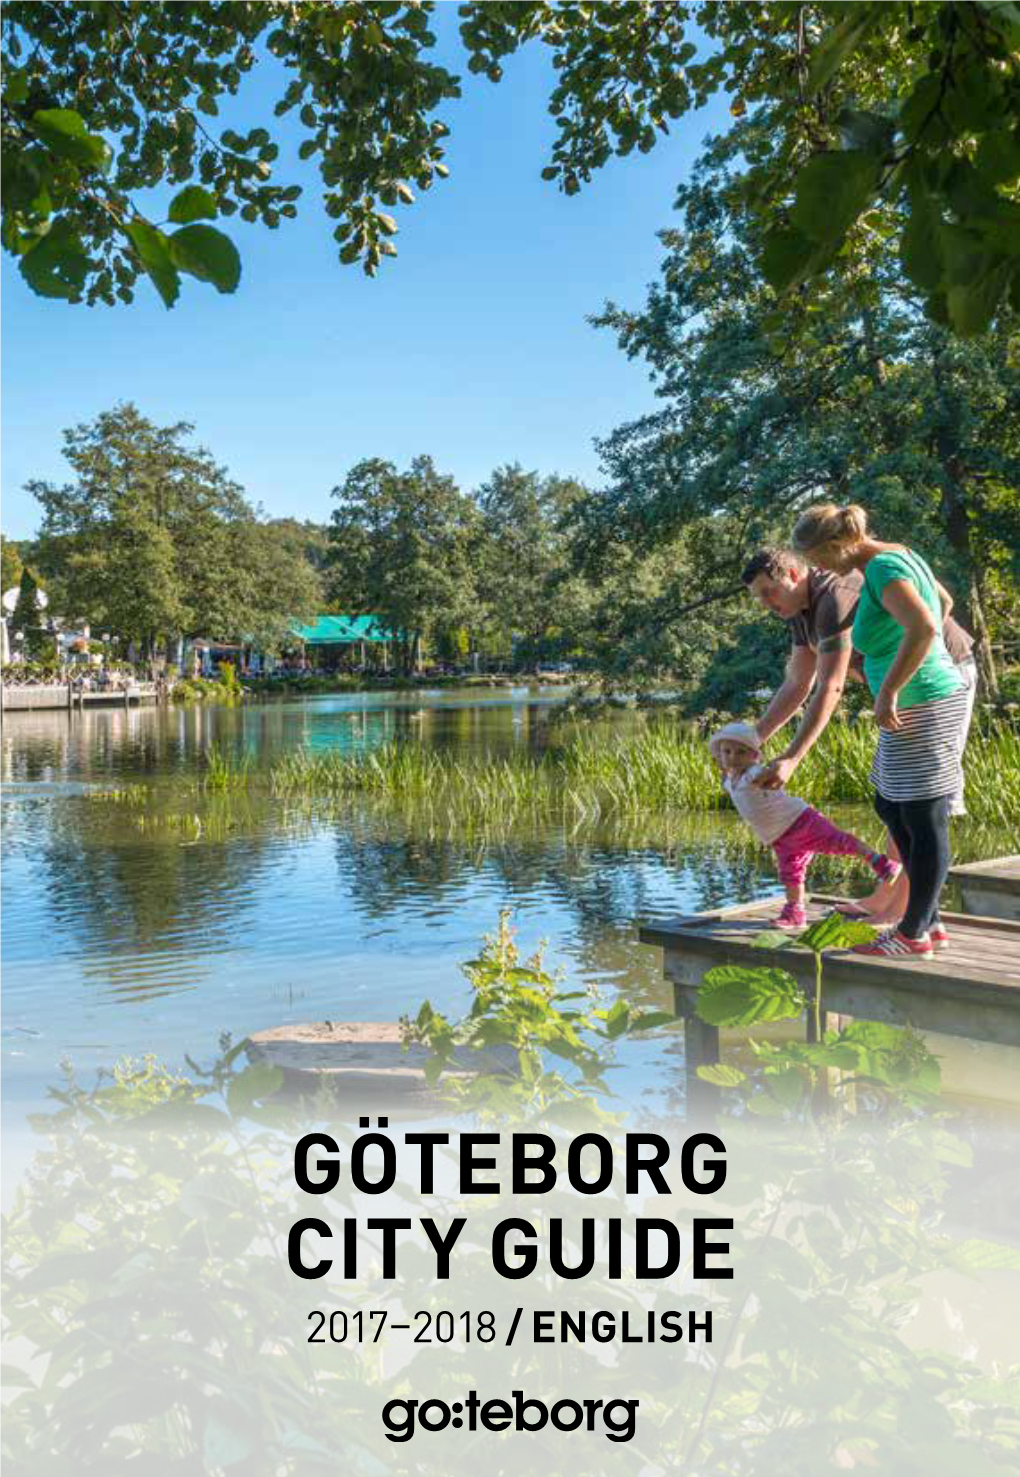 Göteborg City Guide 2017–2018 / English Contents